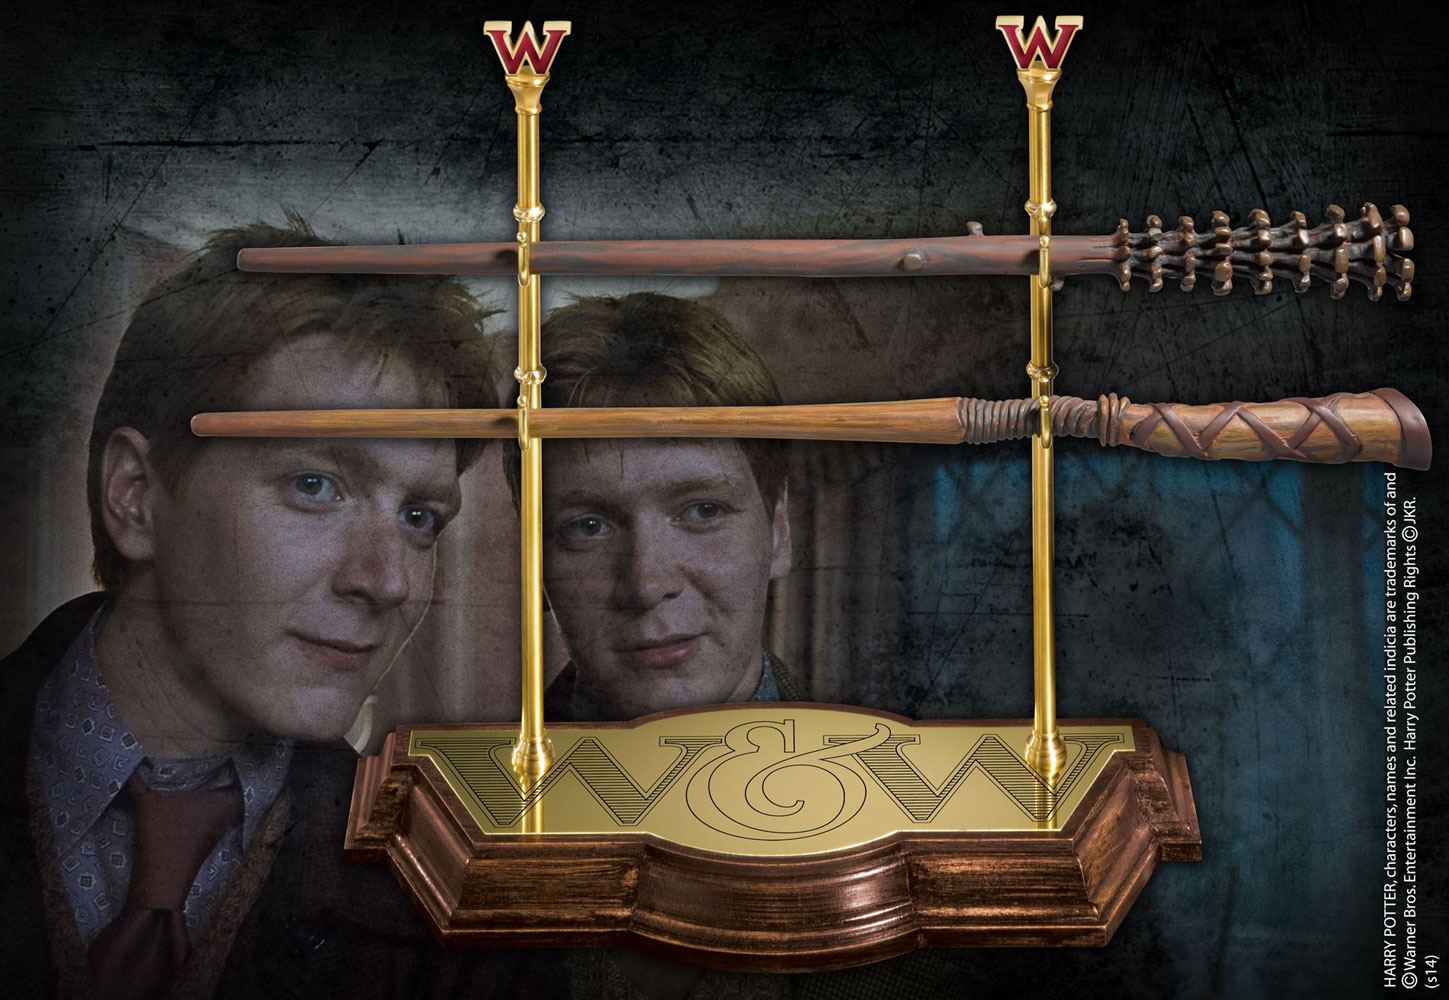 Harry Potter Wand Collection Weasley Twins